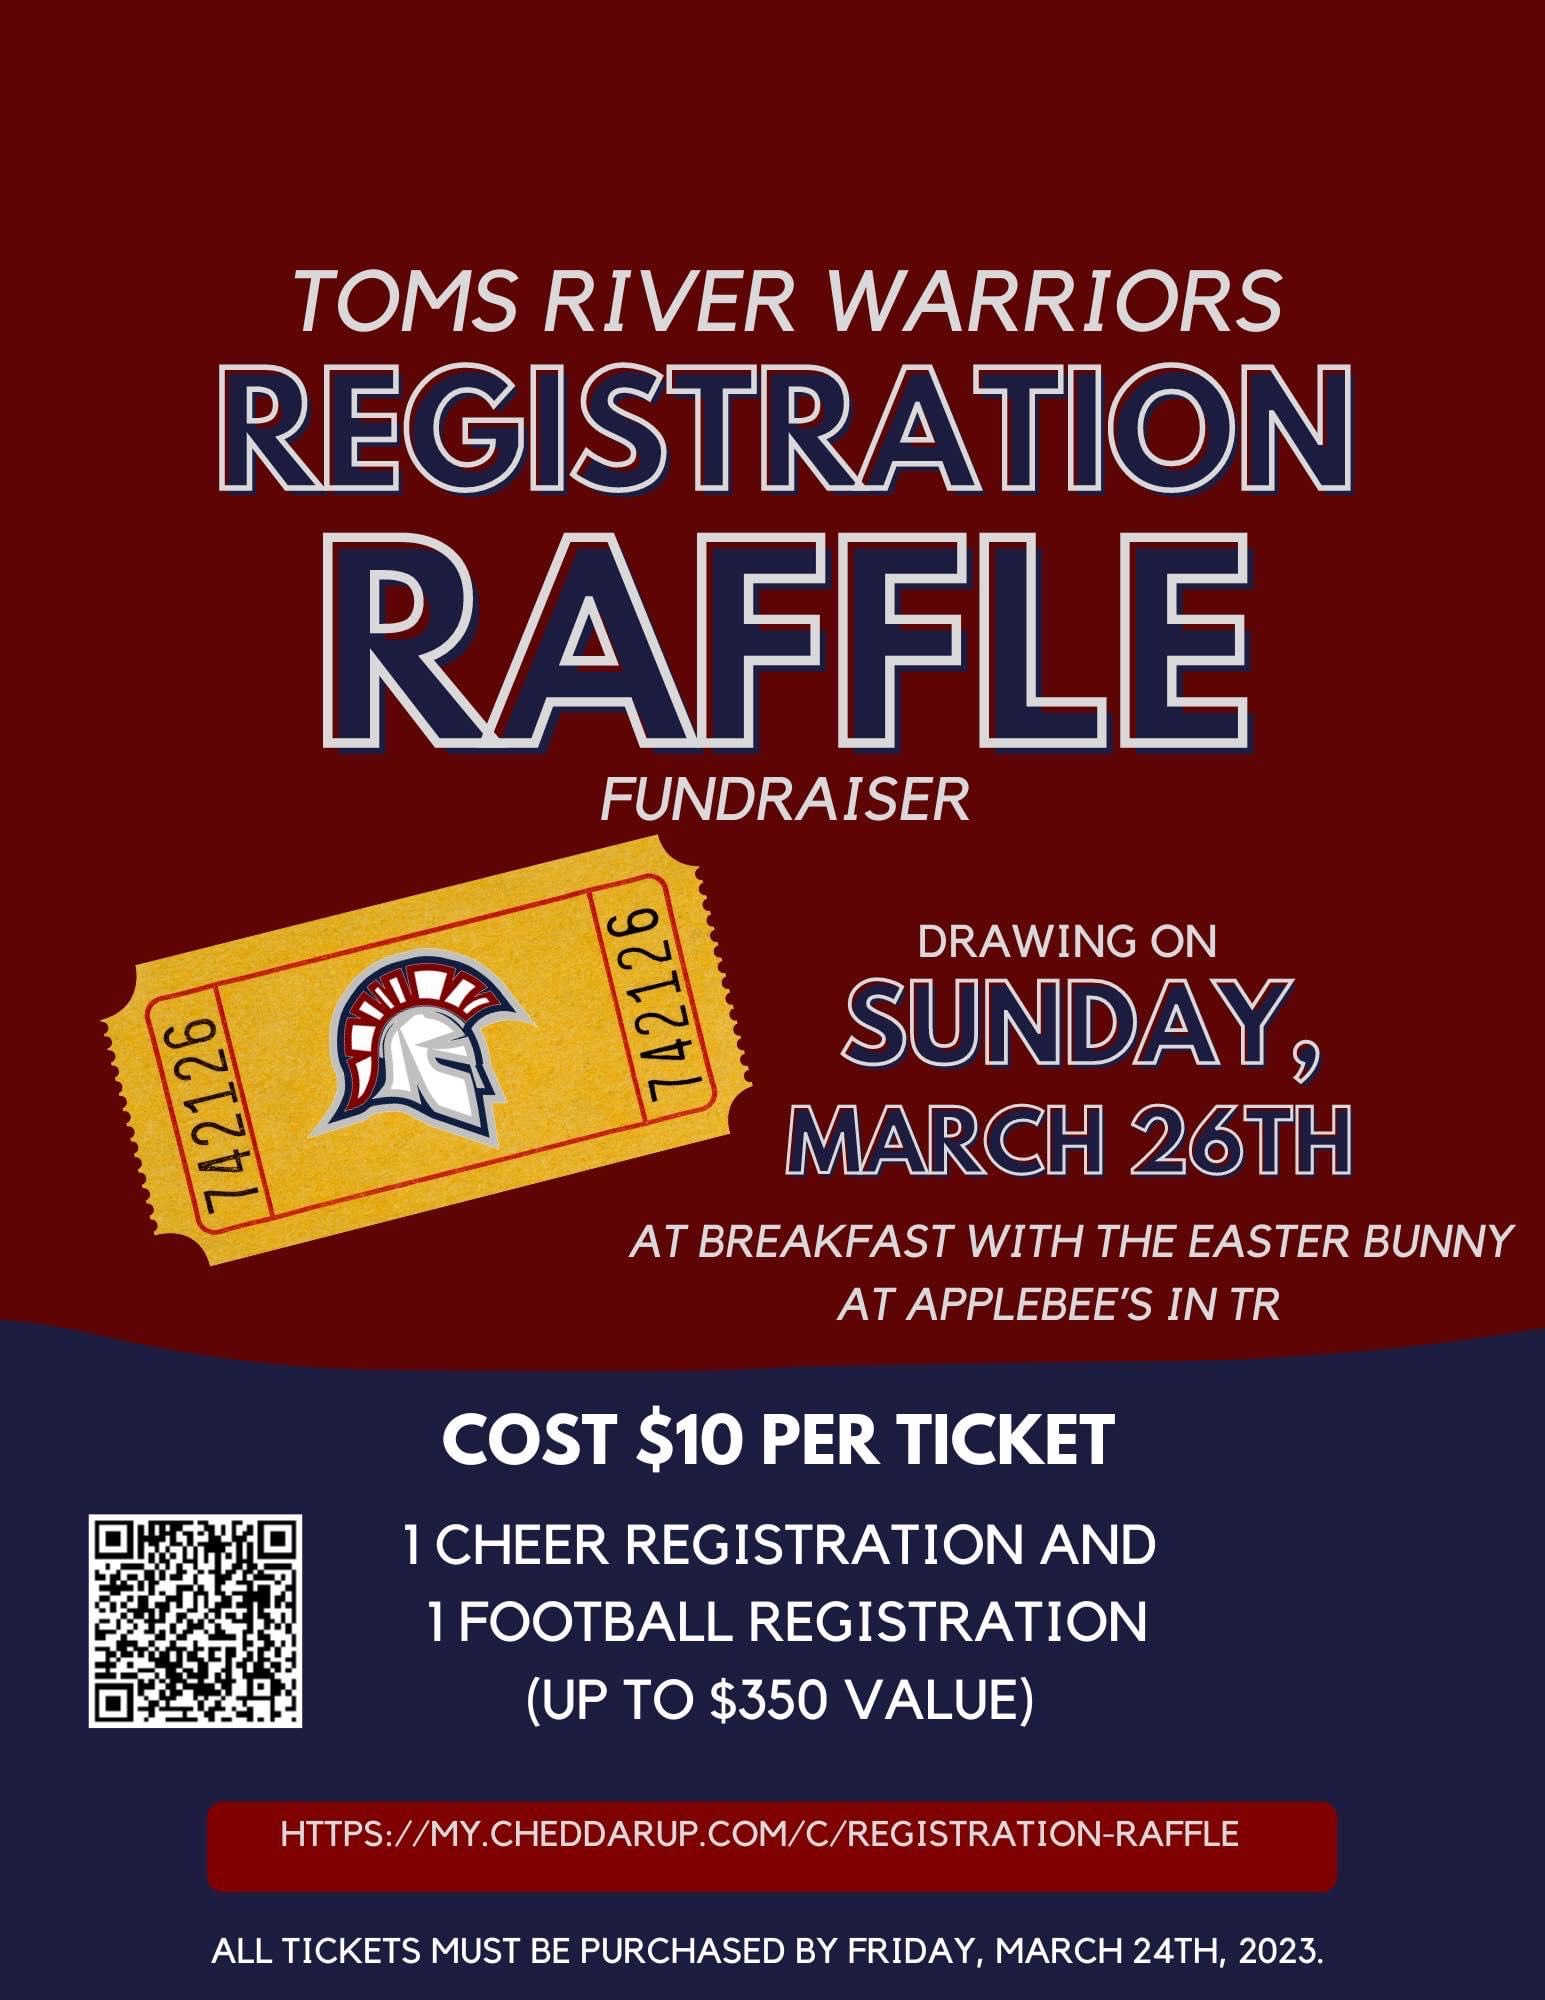 Win a FREE Registration for Toms River Warriors Football & Cheer